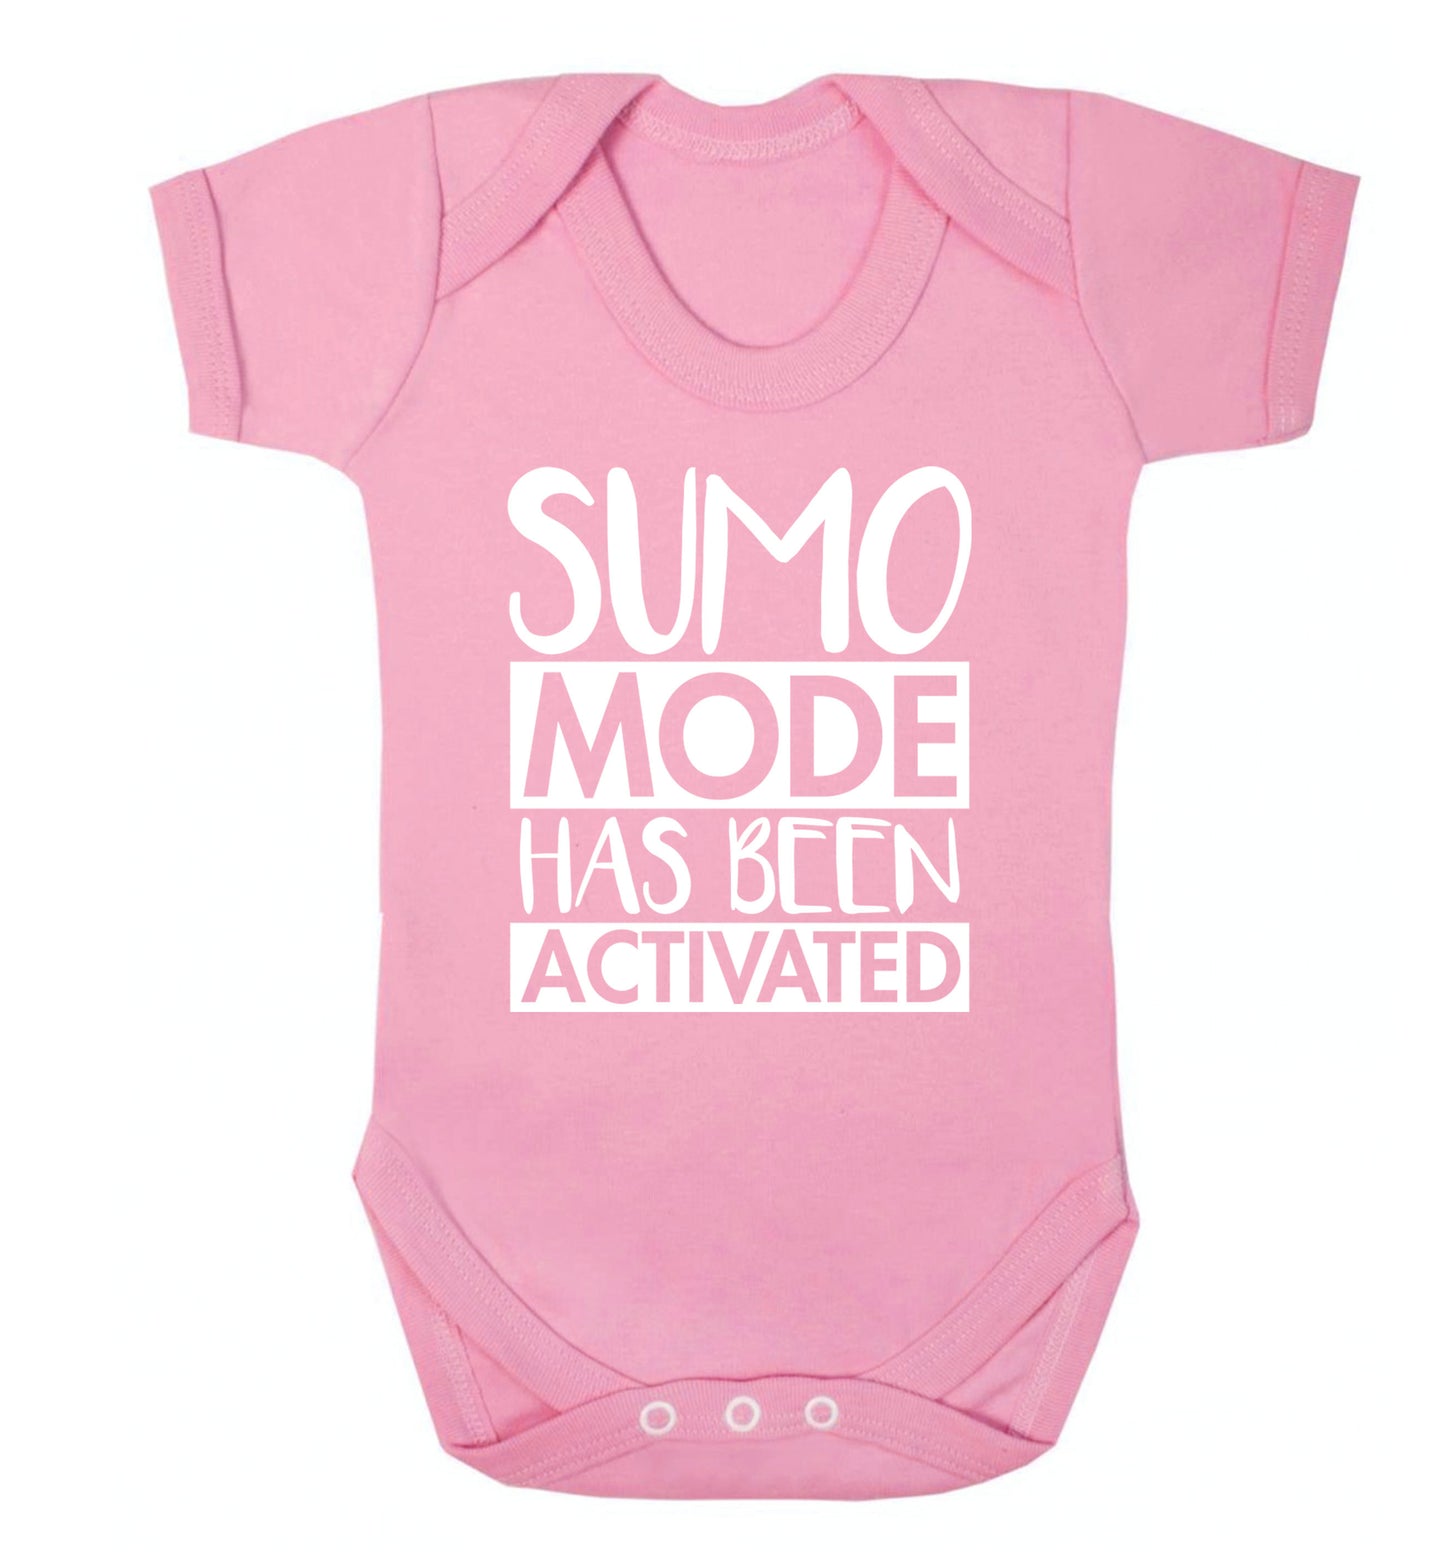 Sumo mode activated Baby Vest pale pink 18-24 months